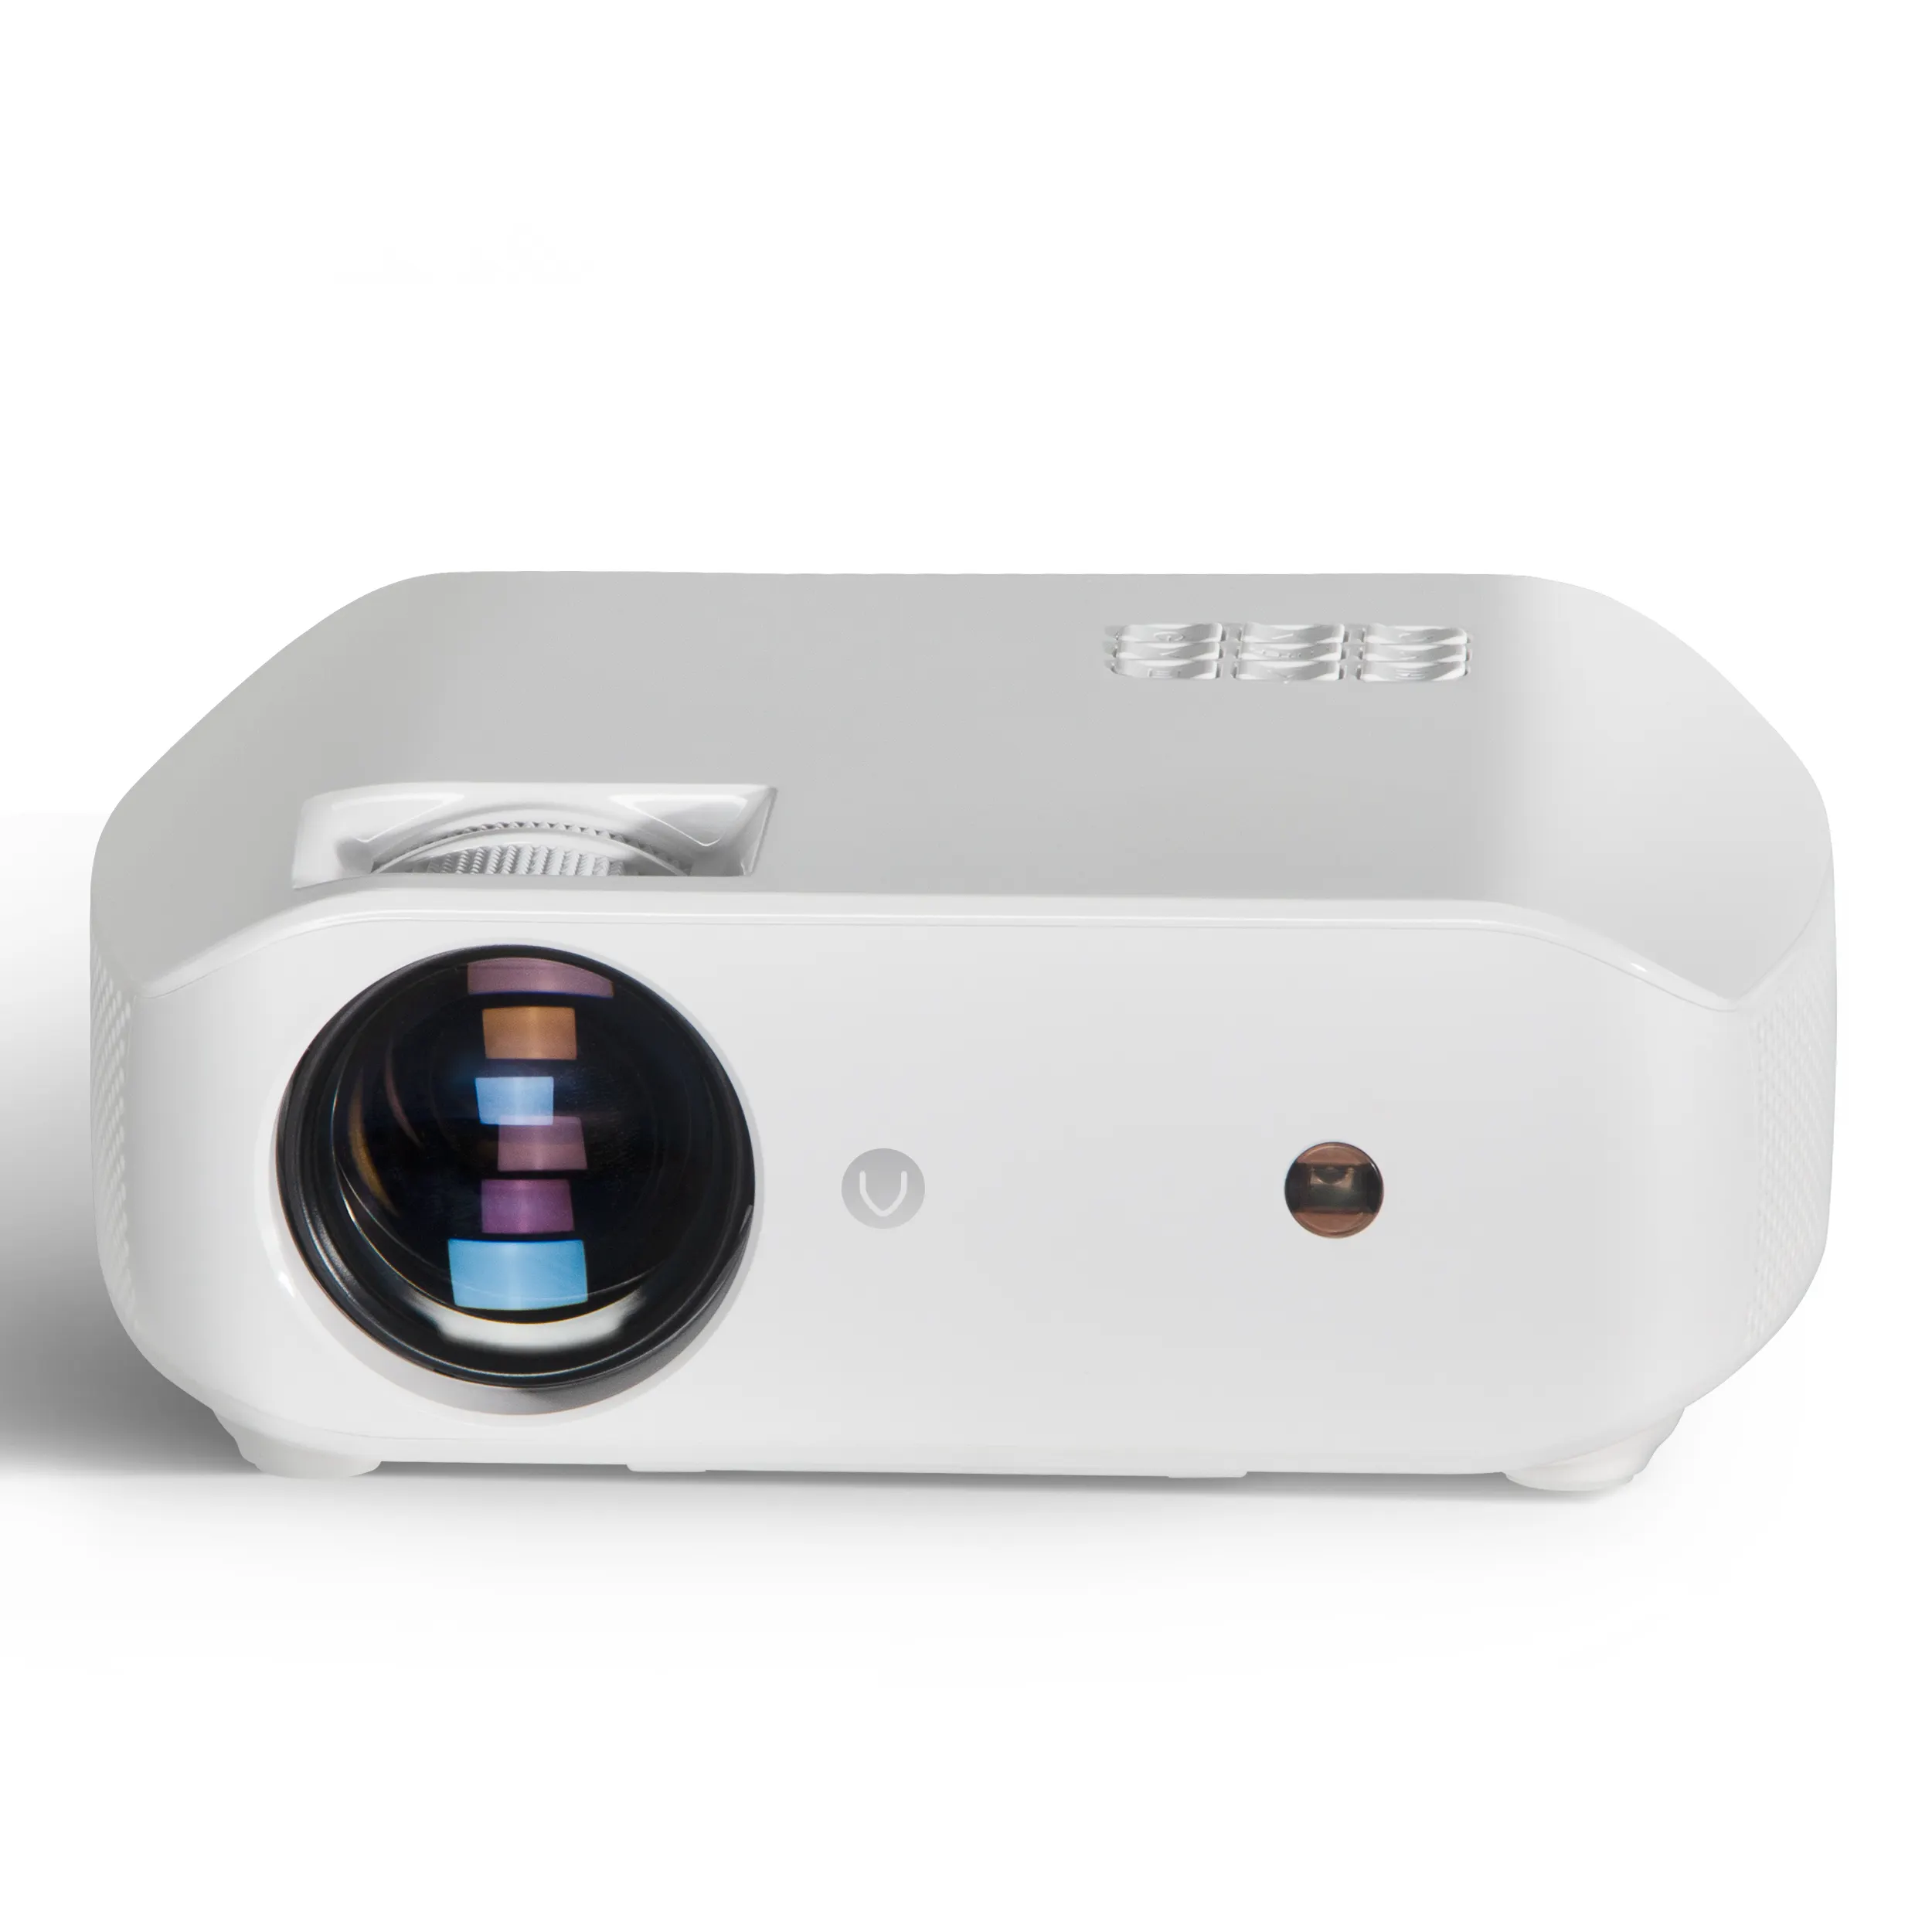 Vivibright Hot 720P 3500 high lumens Compact size 4.0 inch F10 Android Micro portable video projector mini beamer led projector